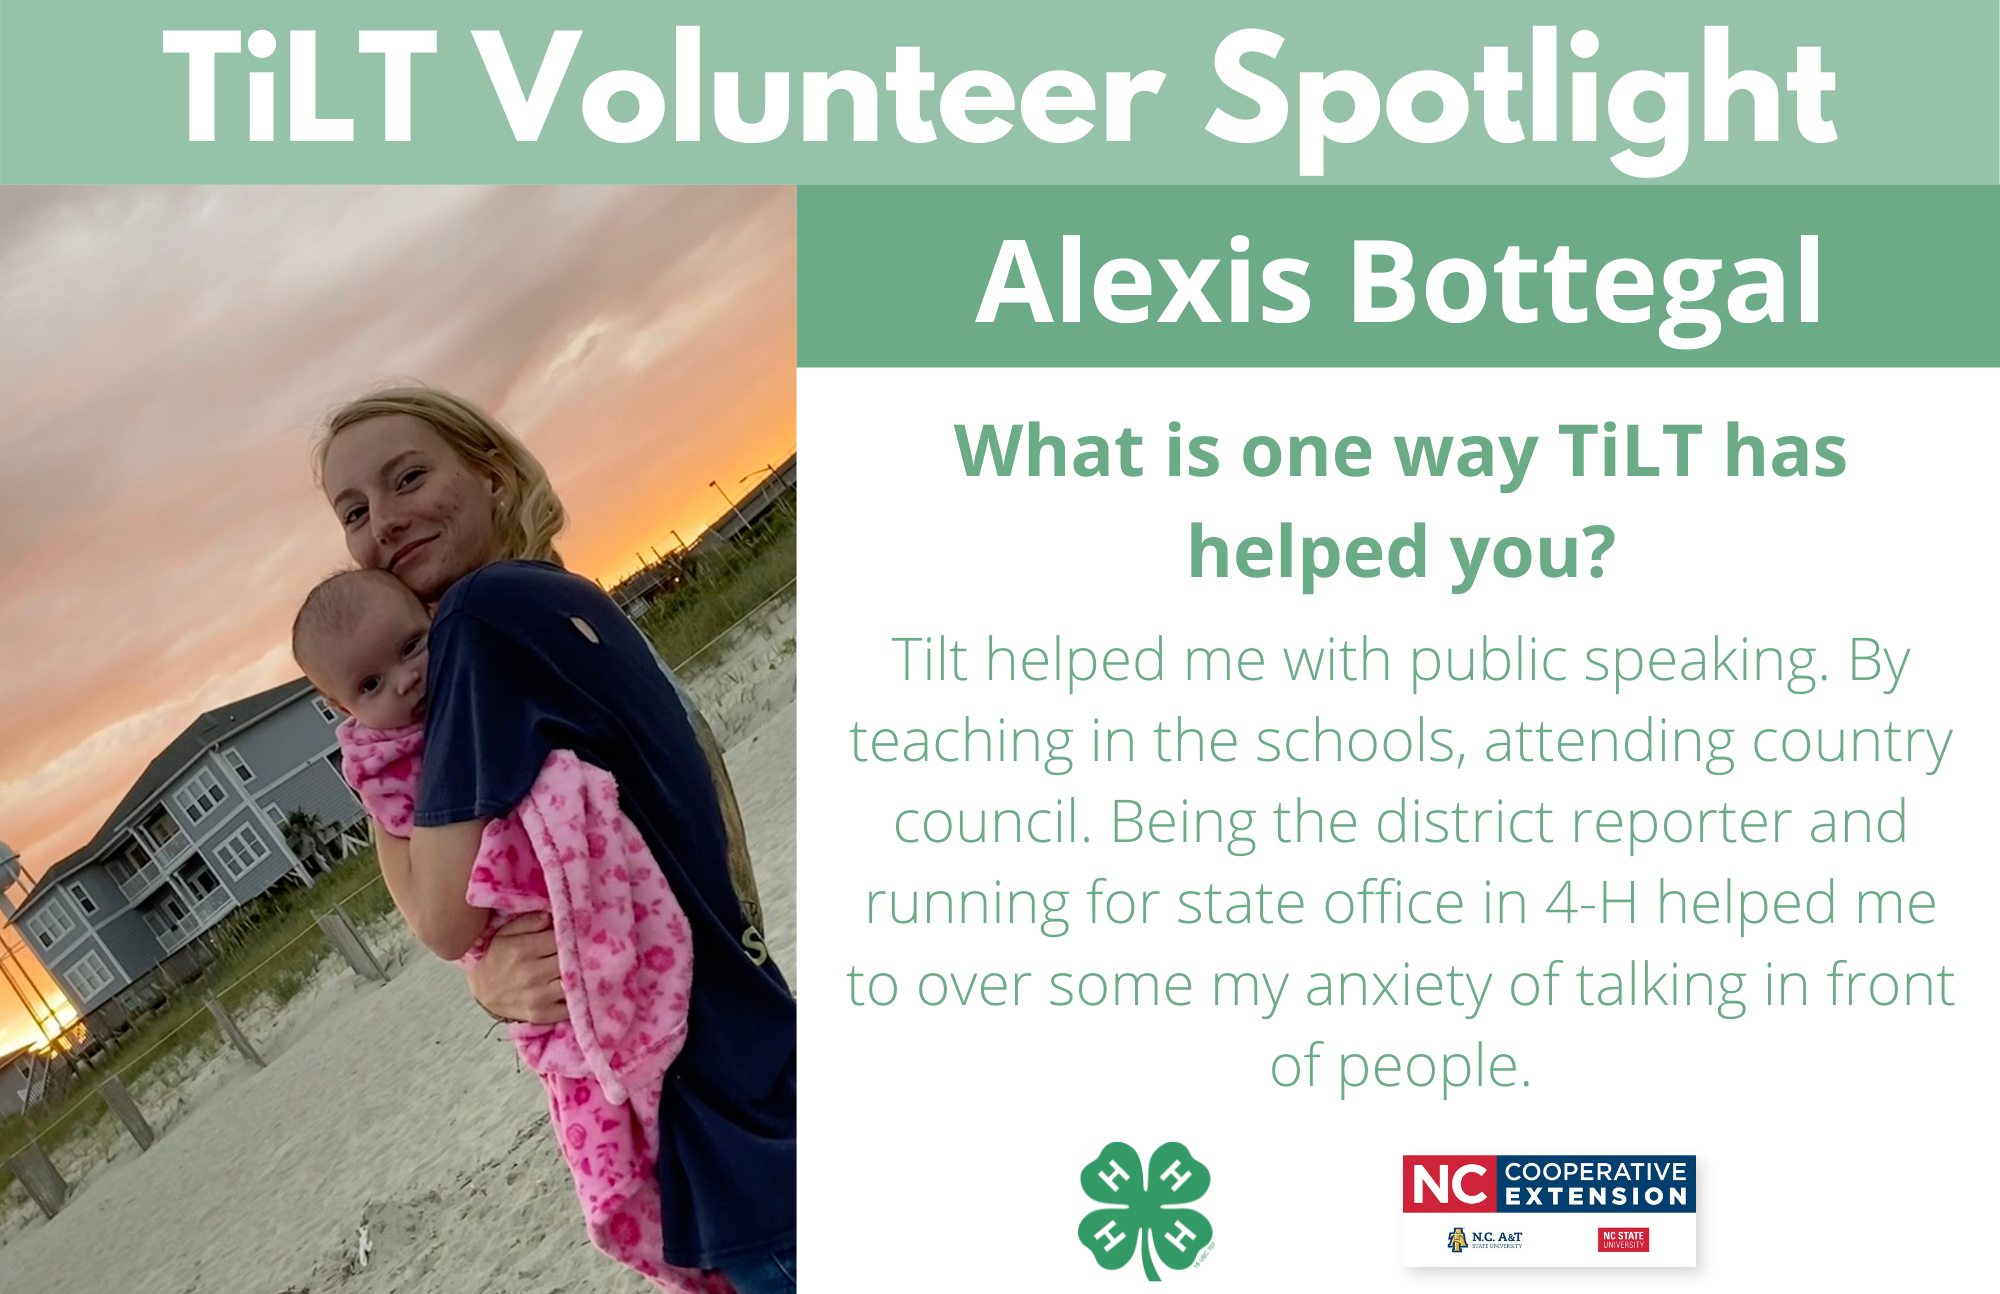 Headshot of Alexis Bottegal with following text to the right of image. TiLT Volunteer Spotlight. Alexis Bottegal. What is one way TiLT has helped you? Tilt helped me with public speaking. By teaching in the schools, attending country council. Being the district reporter and running for state office in 4-H helped me to over some my anxiety of talking in front of people.